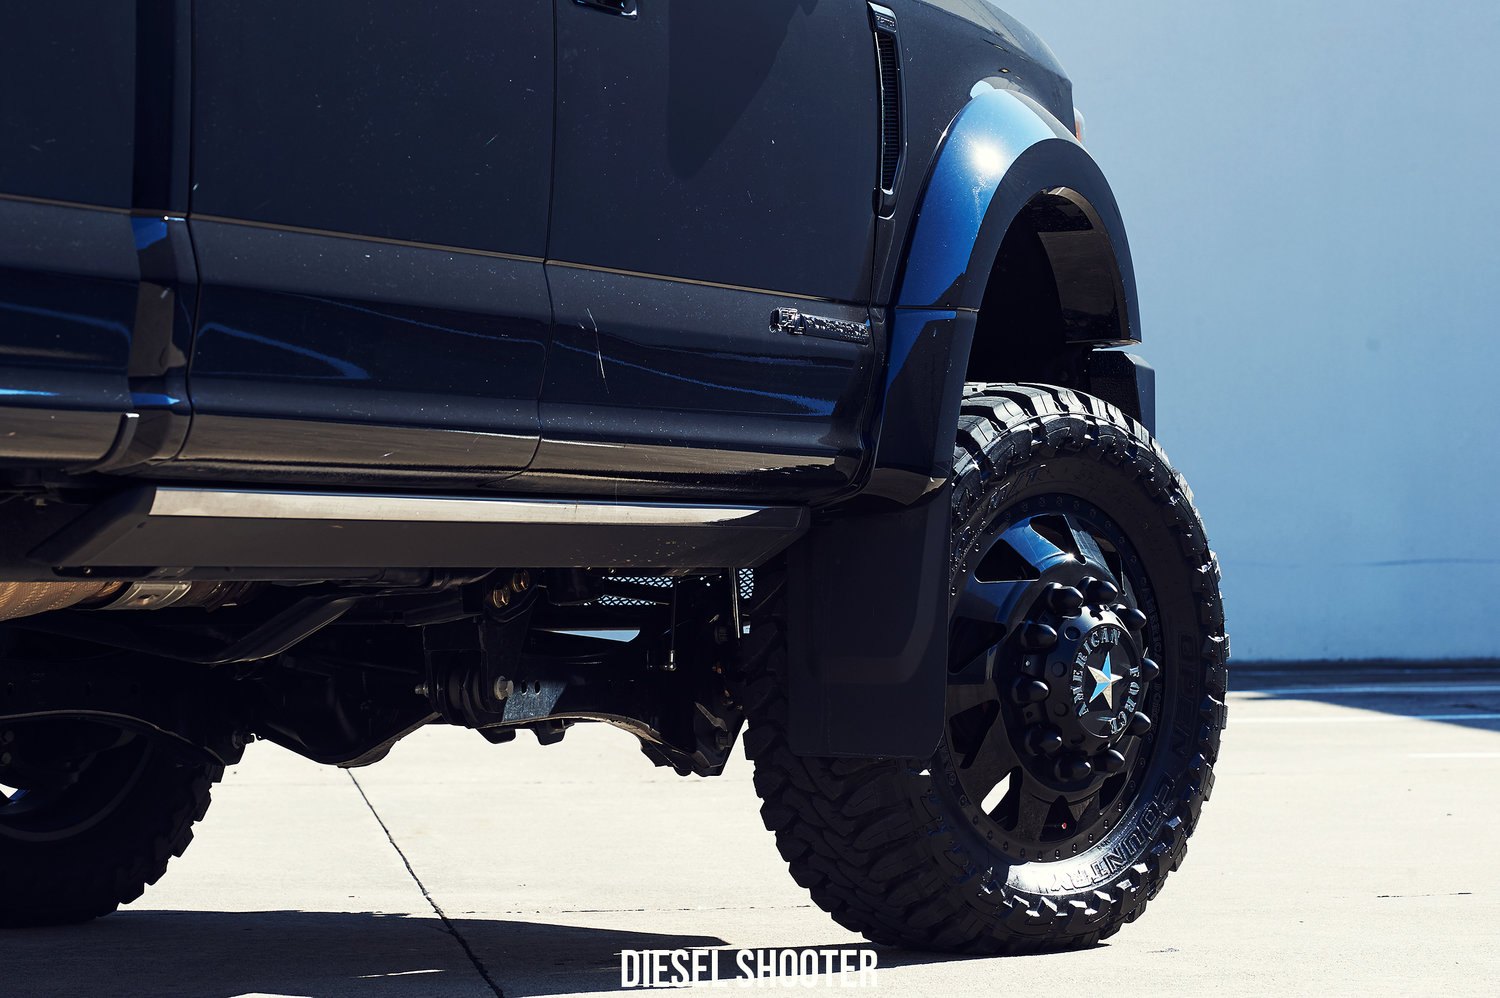 Black Forged Custom Wheels on Ford F-450 - Photo by Diesel Shooter